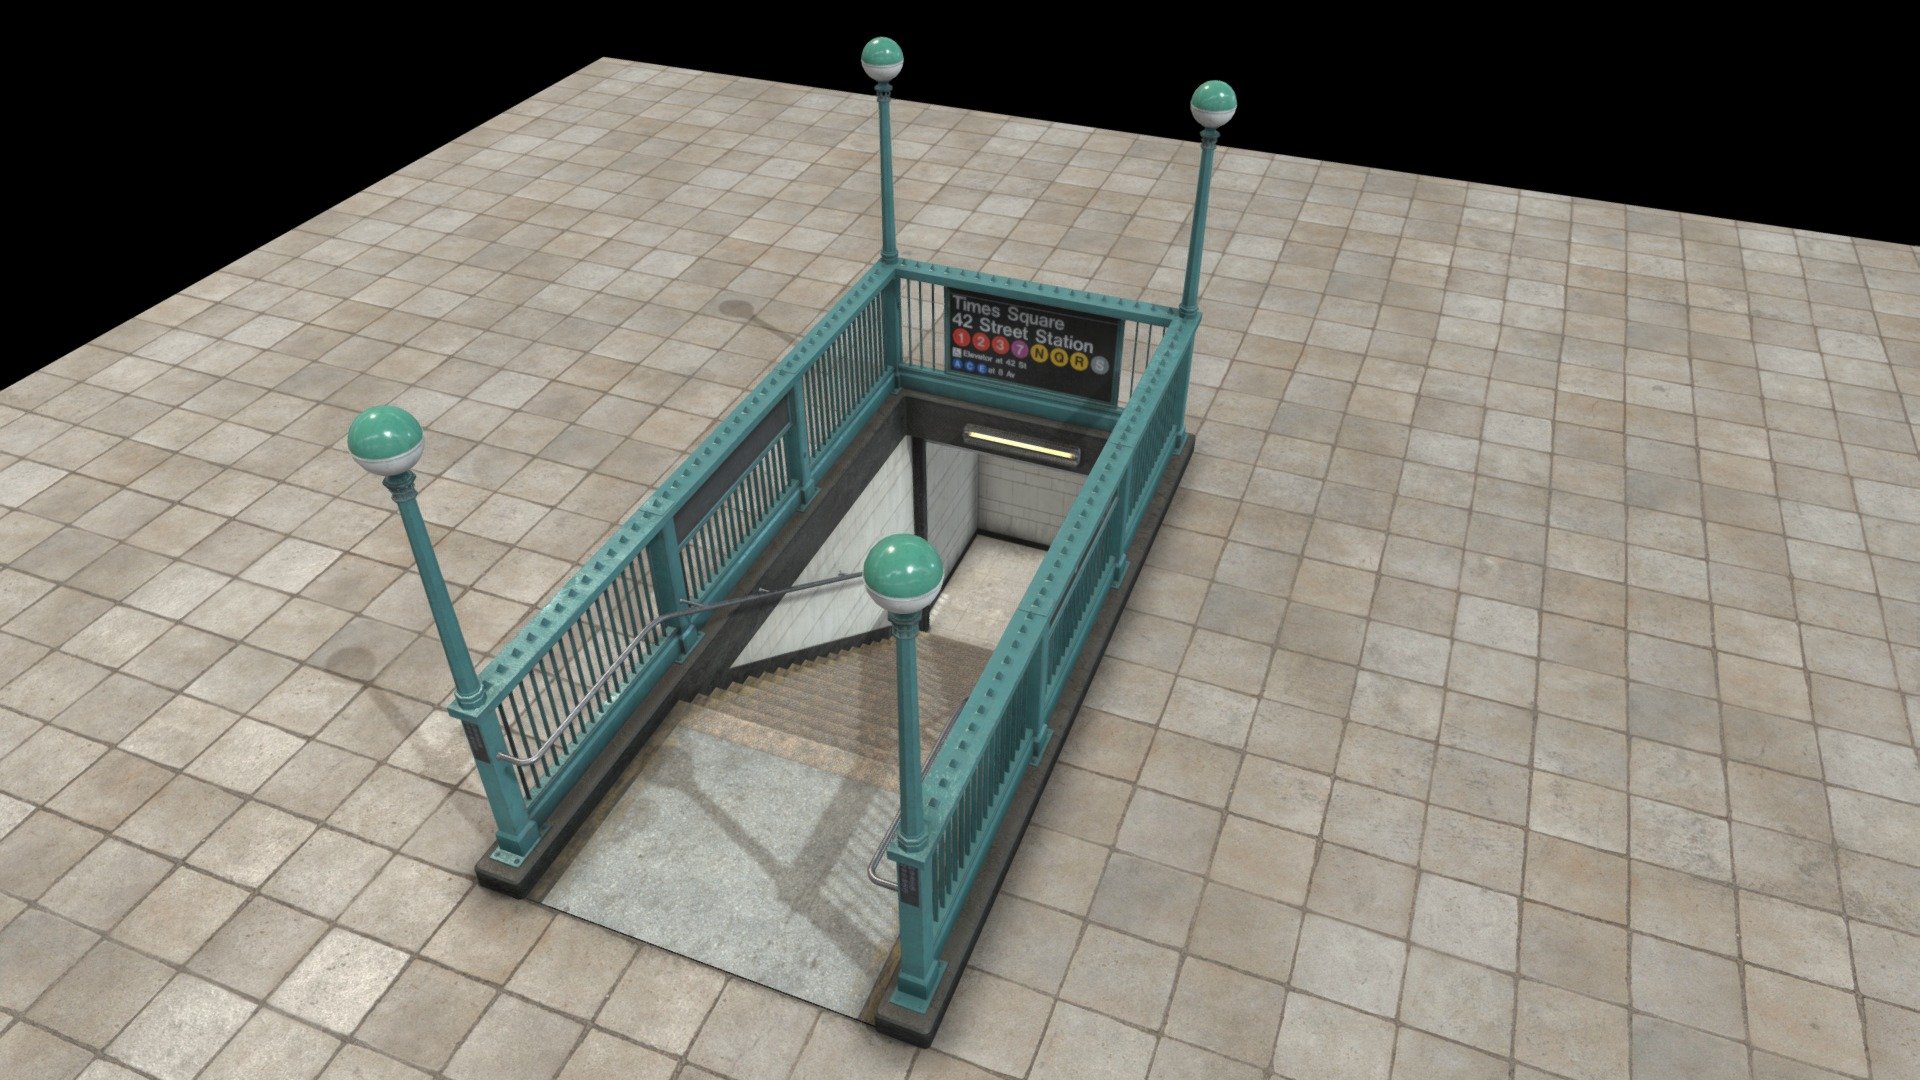 Subway Entrance

Textures in 4K

AO (4096x4096)

Color (4096x4096)

Normal Map (4096x4096)

Roughness (4096x4096)

Lumi (4096x4096)

Glass(4096x4096)

UV Maps

Ready for Games 3d model